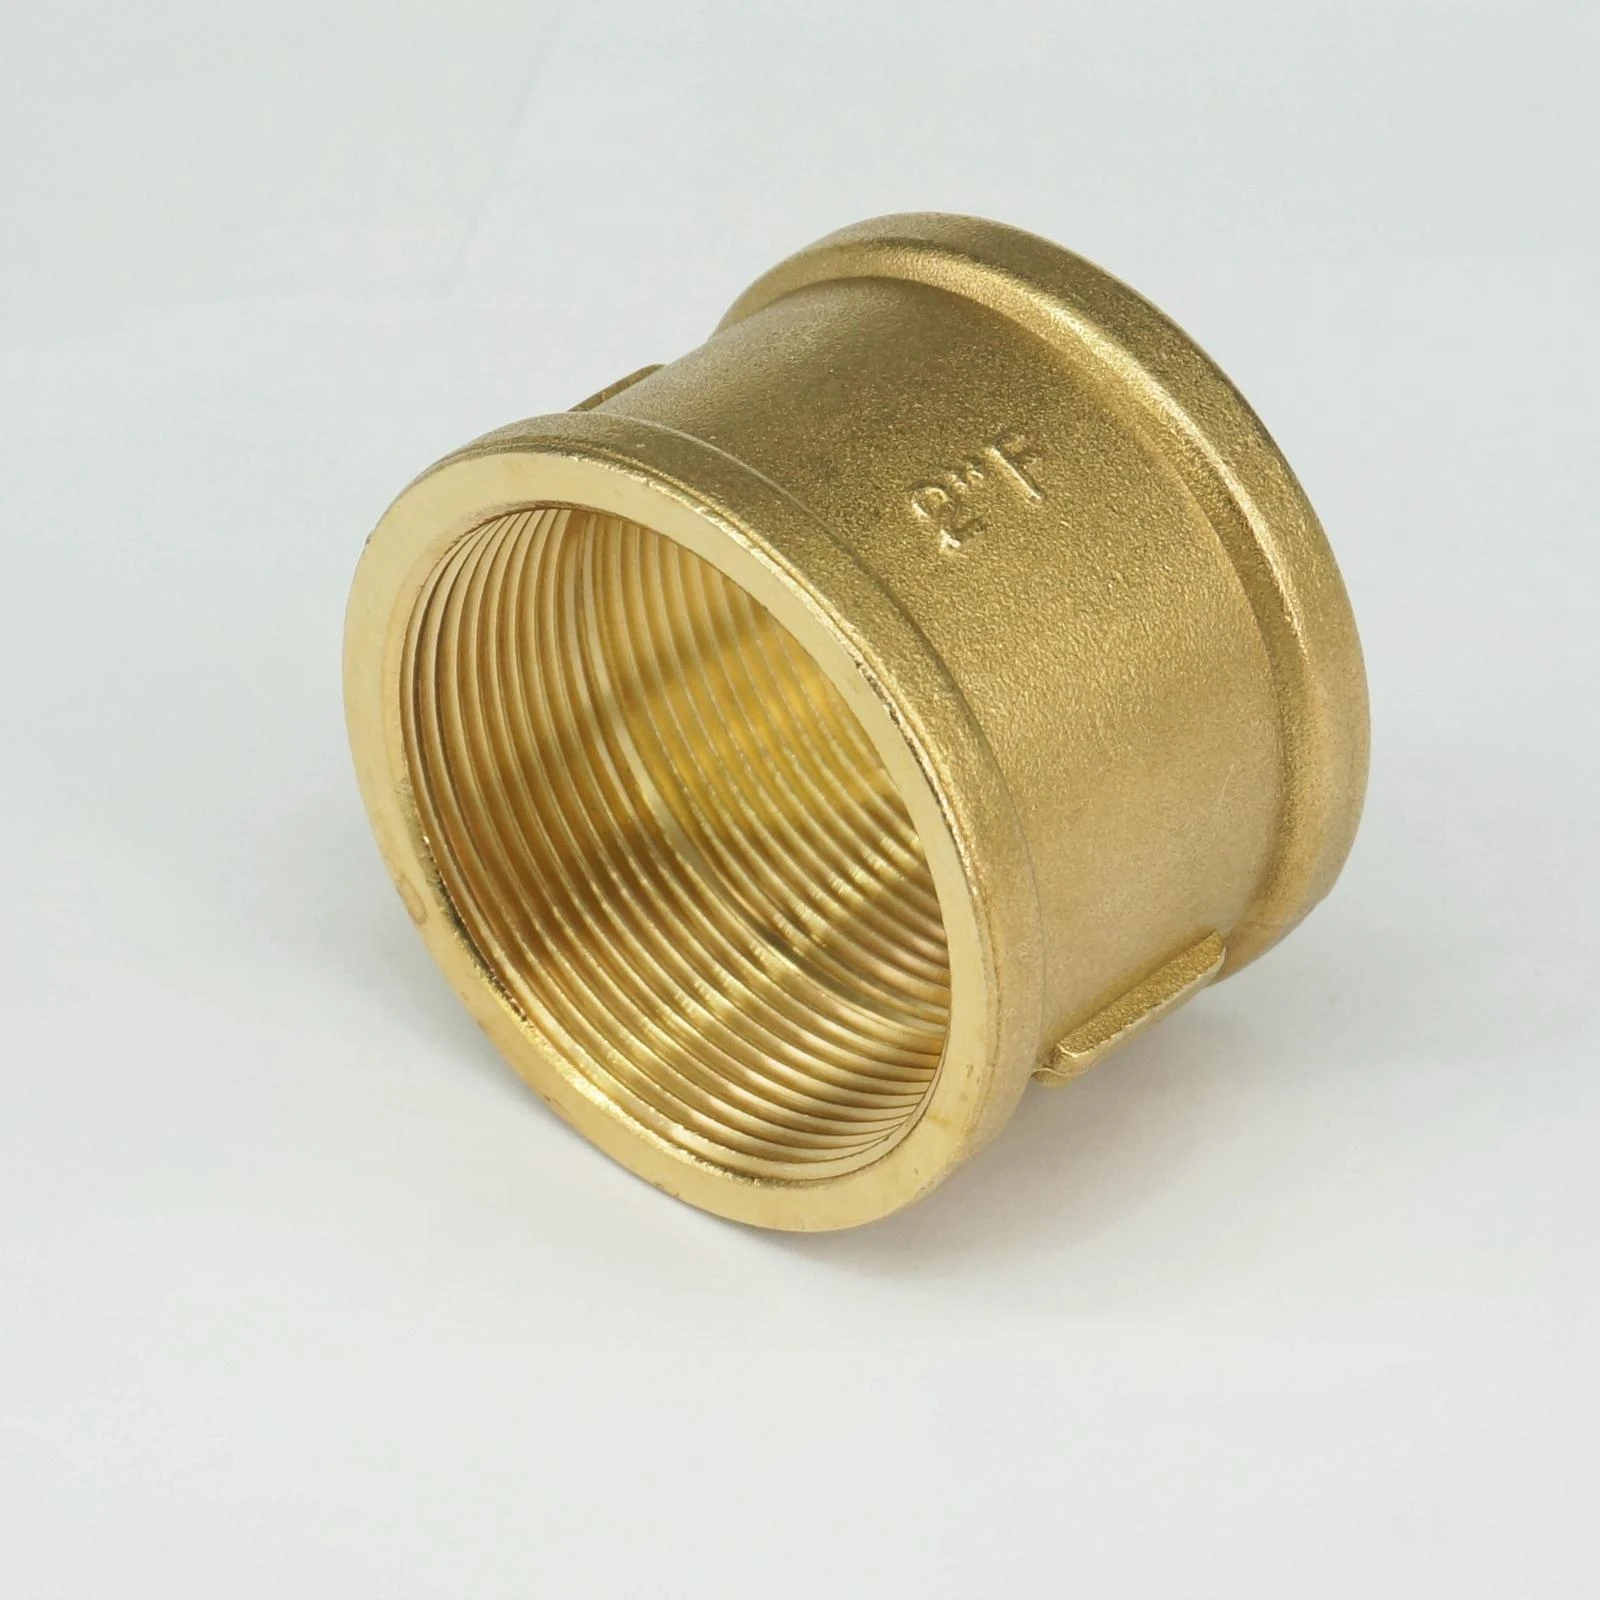 1/2 BSP Female Thread Brass Pipe Fittings Rounding Nut Rod Connector Coupling Full Port 